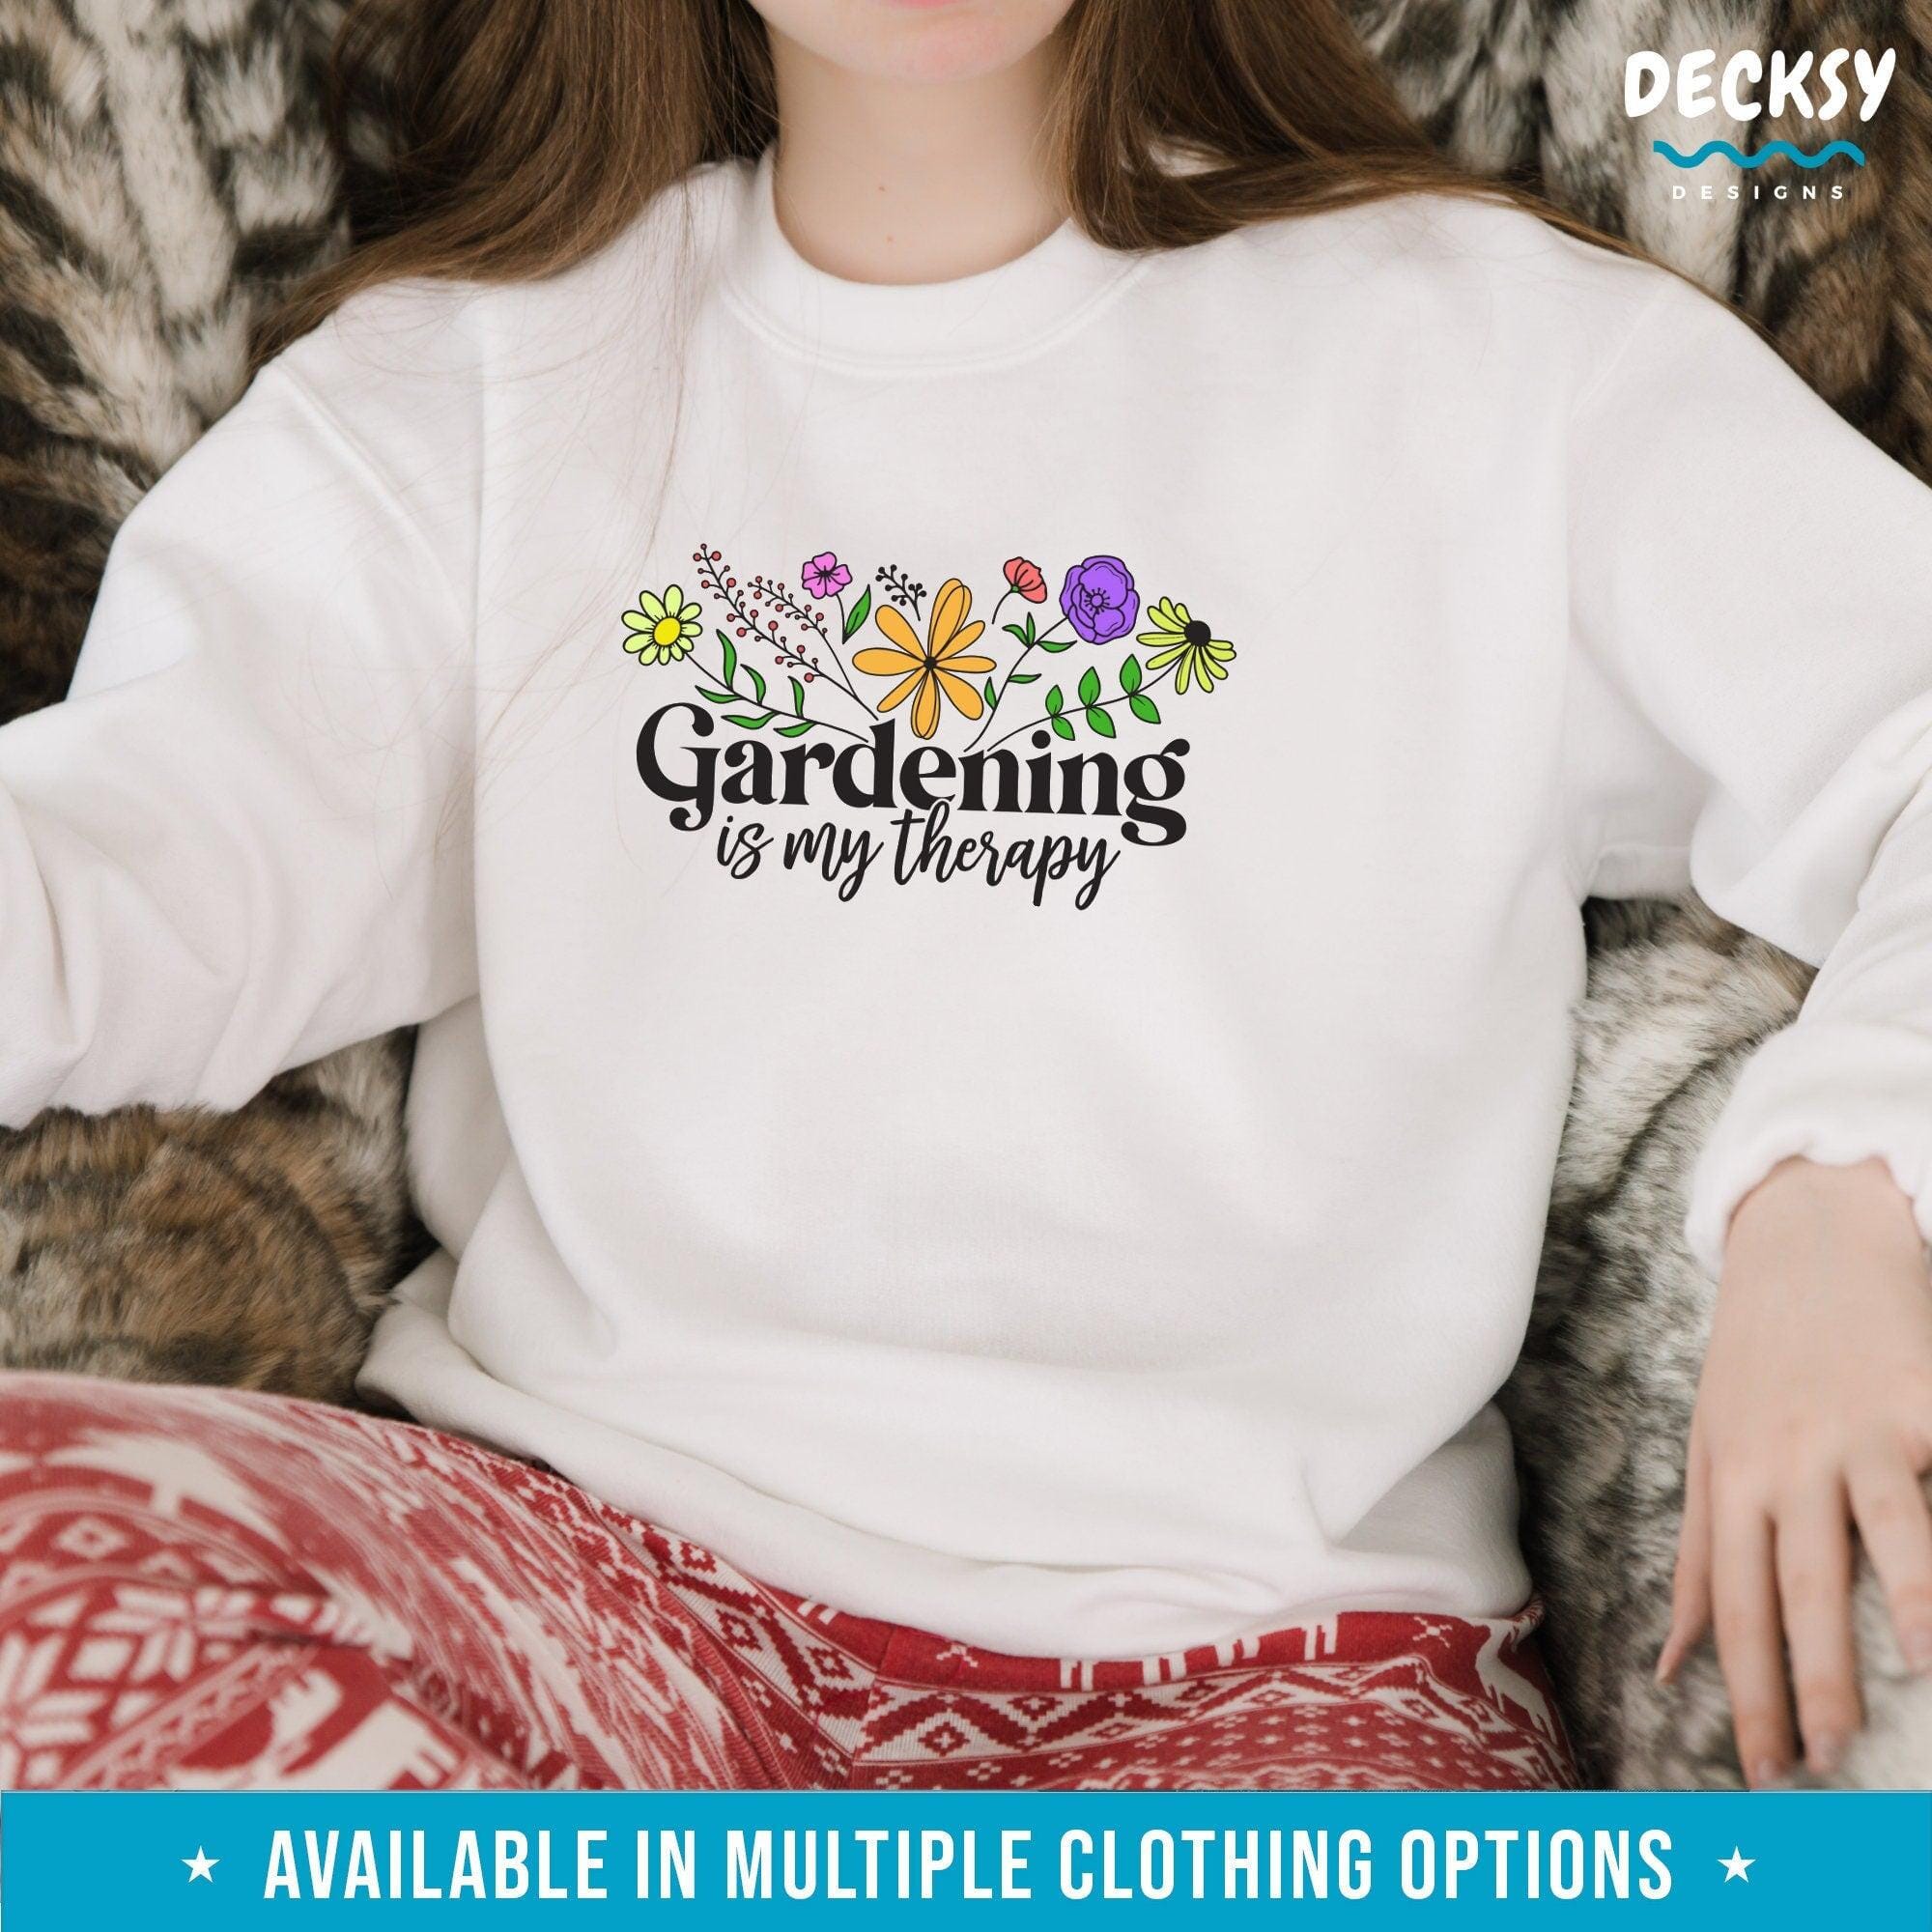 Plant Lover Shirt, Funny Gift For Gardeners-Clothing:Gender-Neutral Adult Clothing:Tops & Tees:T-shirts:Graphic Tees-DecksyDesigns